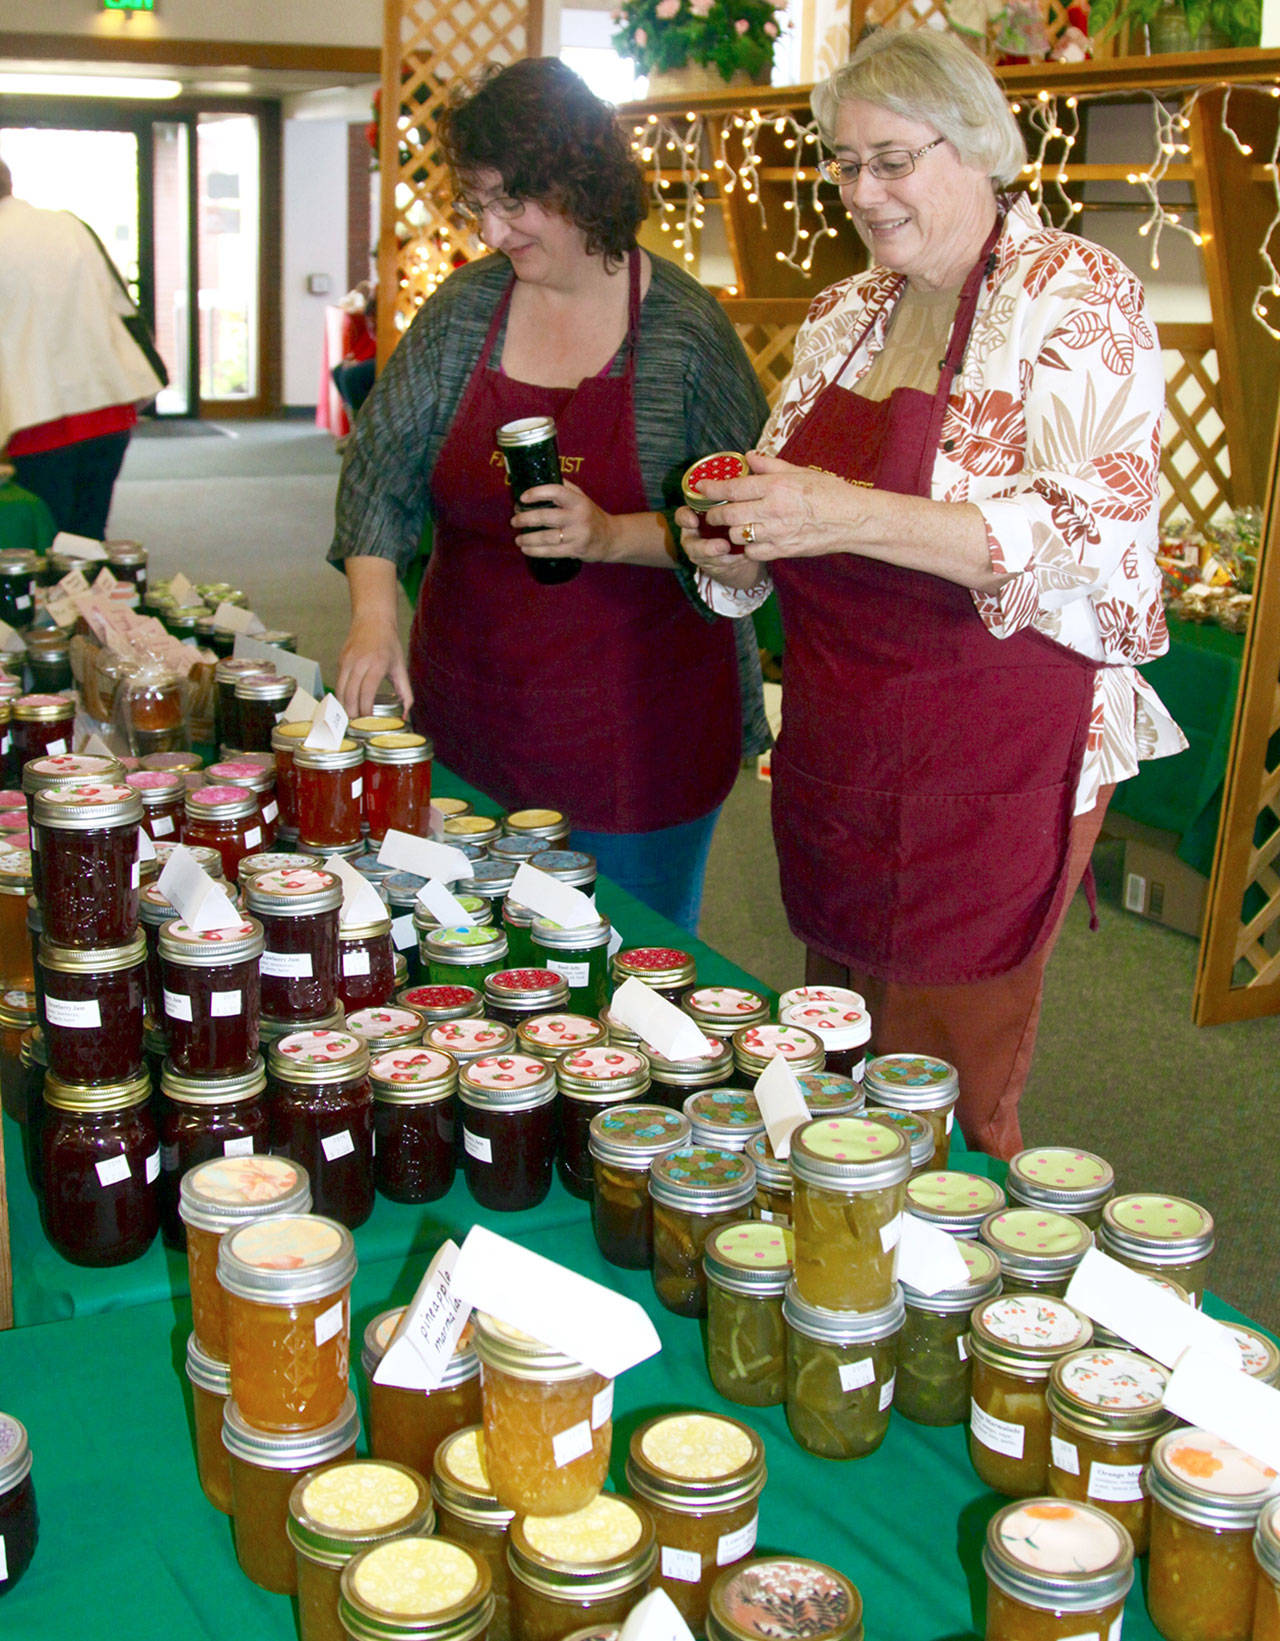 Kim Luker, left, and Robin Sweeney look over the many homemade jams and jellies for sale at the 2018 Holiday Bazaar sale at the First Baptist Church in Port Angeles this file photo. The church’s annual bazaar is among several scheduled this weekend on the North Olympic Peninsula. (Dave Logan/for Peninsula Daily News)